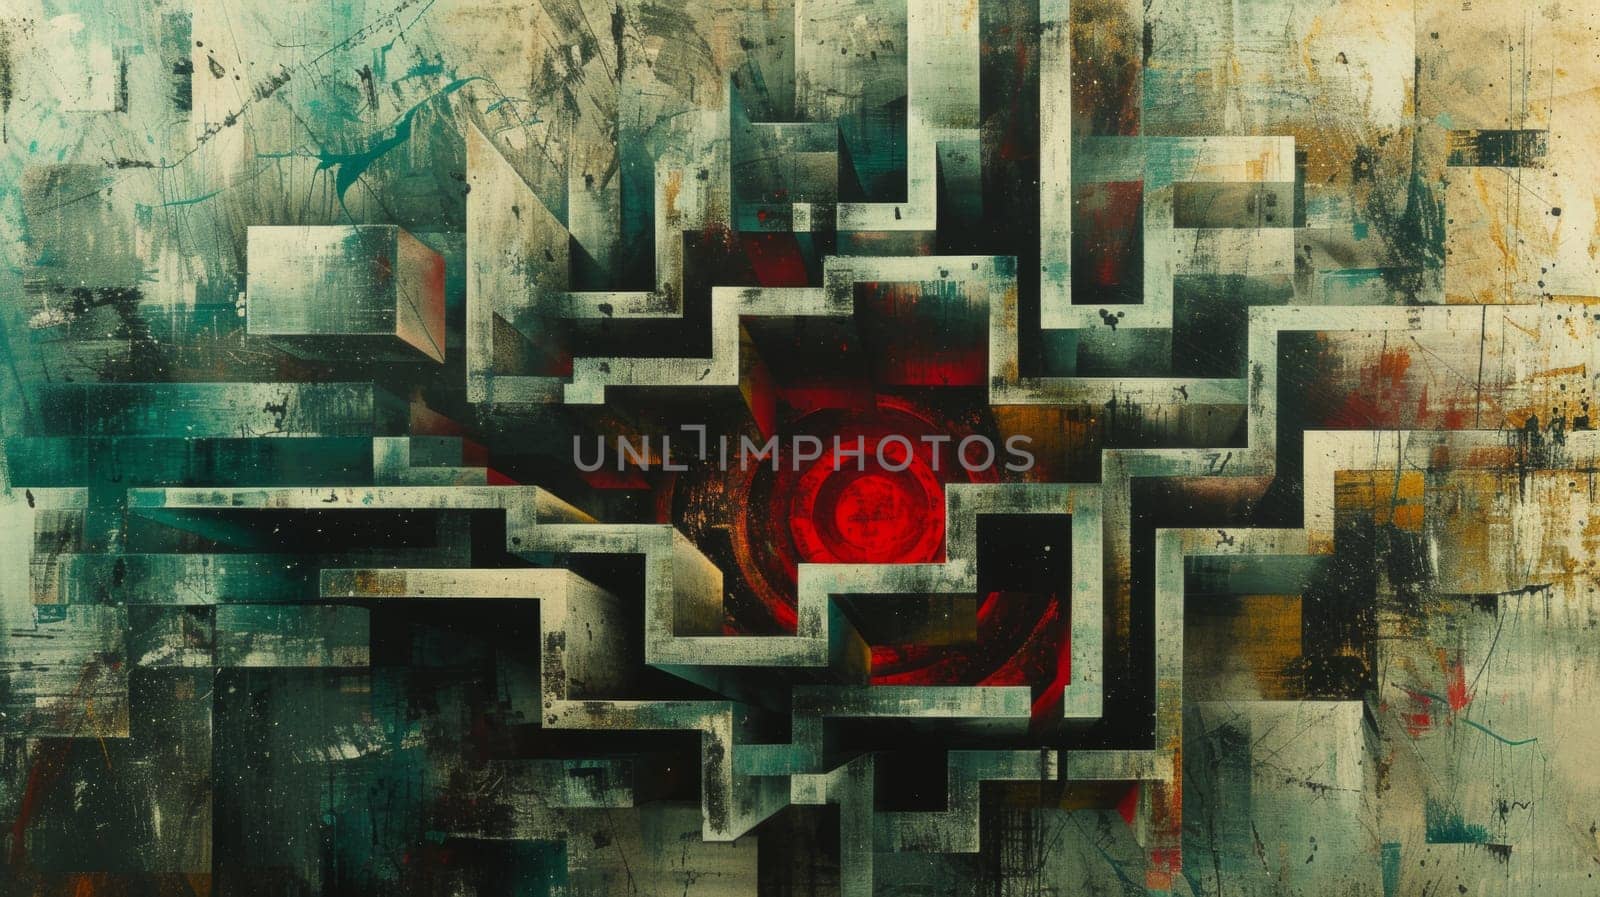 A painting of a red object in the middle surrounded by abstract shapes